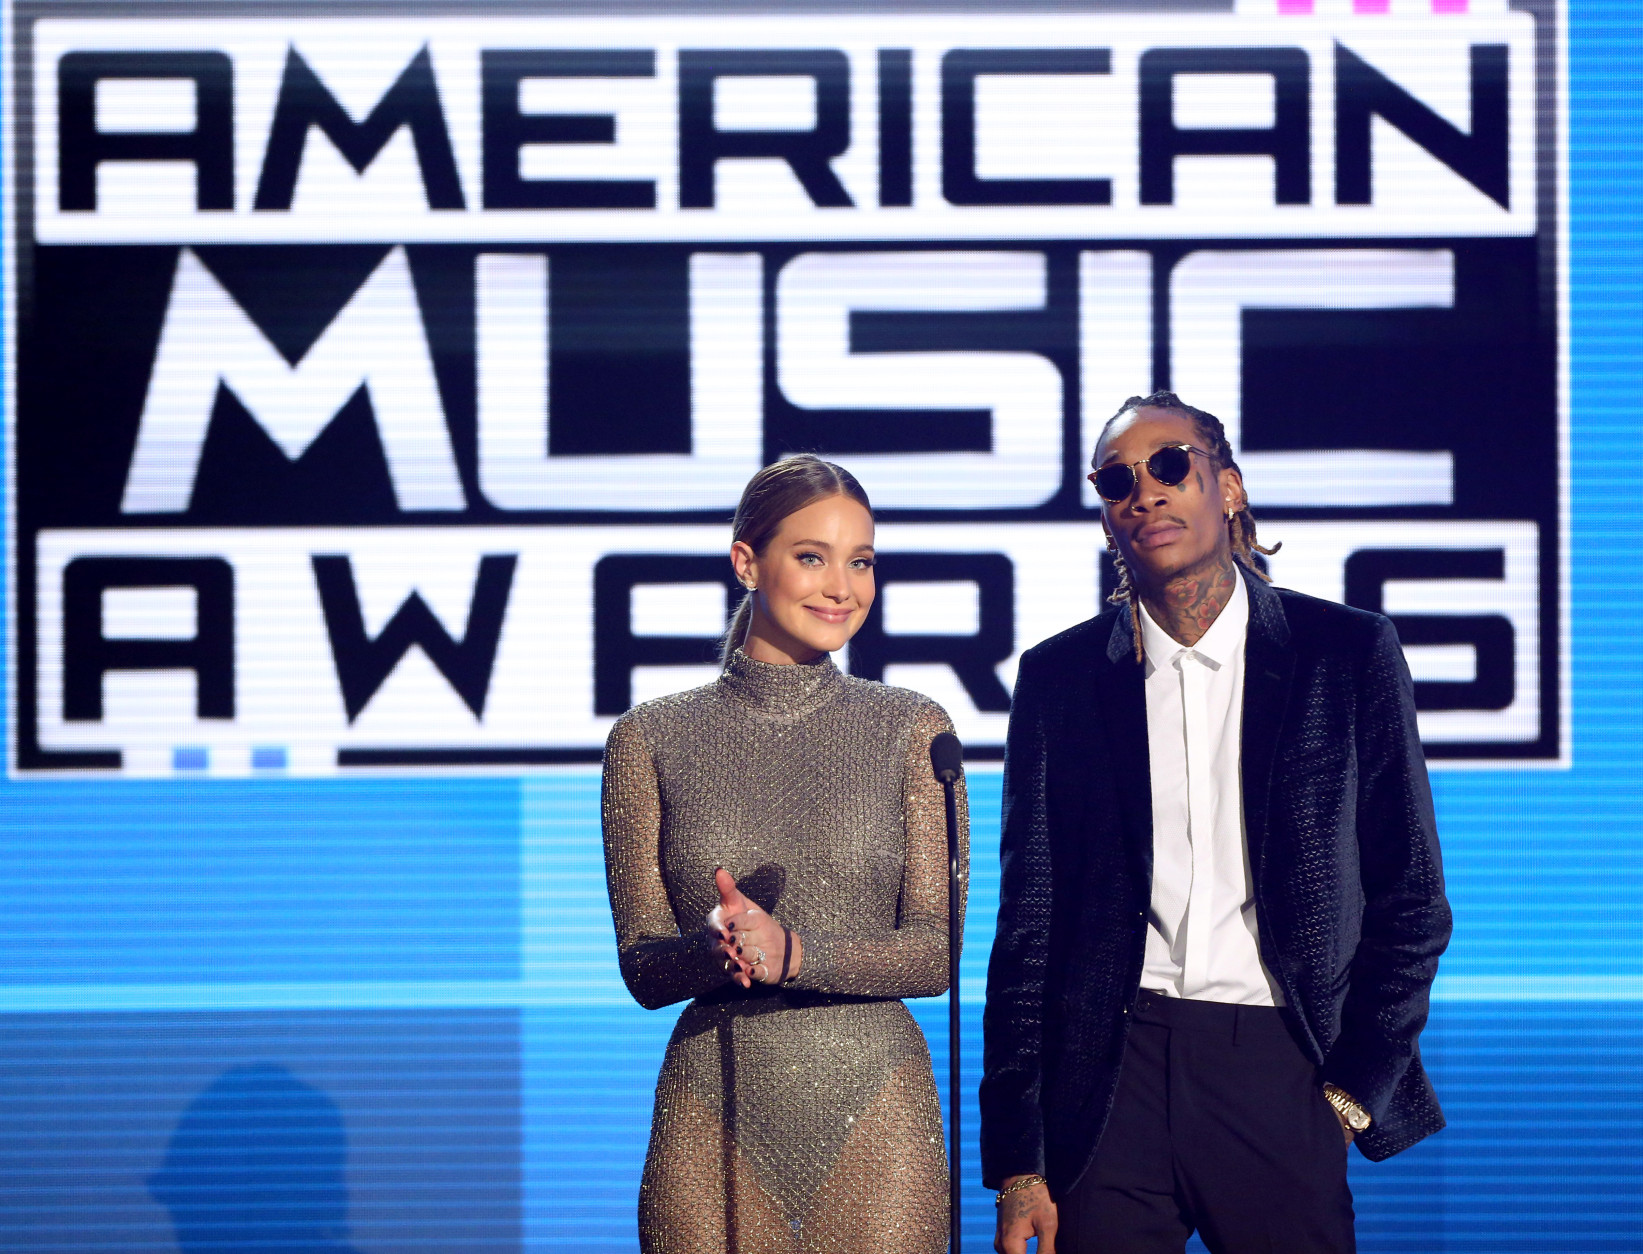 Hannah Davis, left, and Wiz Khalifa introduce a performance by 5 Seconds of Summer at the American Music Awards at the Microsoft Theater on Sunday, Nov. 22, 2015, in Los Angeles. (Photo by Matt Sayles/Invision/AP)